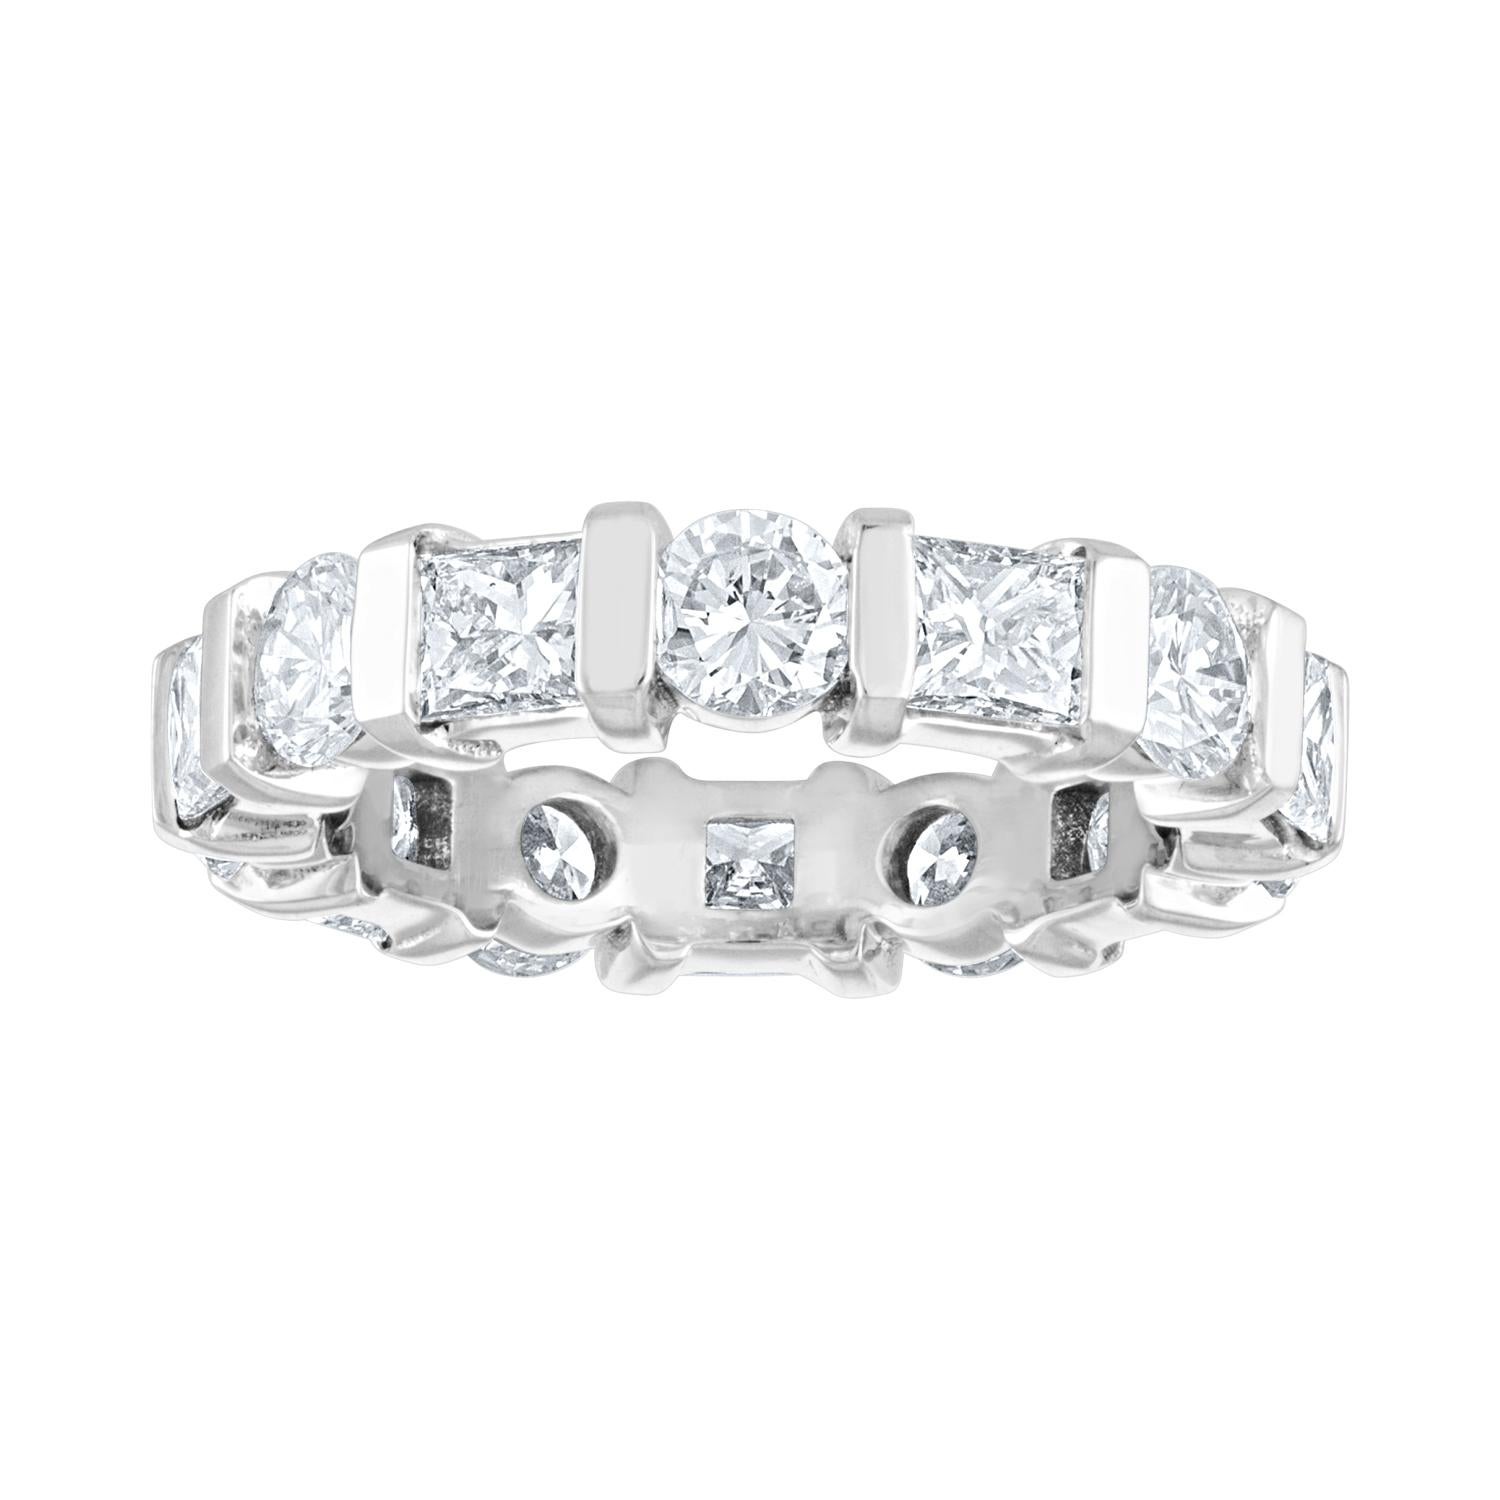 Beautiful Eternity Band with Alternating Round & Princess Diamonds
The ring is 18KW Gold.
There are 1.80 Carats In Round Diamonds G/H VS
There are 1.70 Carats In Princess Diamonds G/H VS
The ring weighs 5.4 grams
The ring is a size 5.5, cannot be